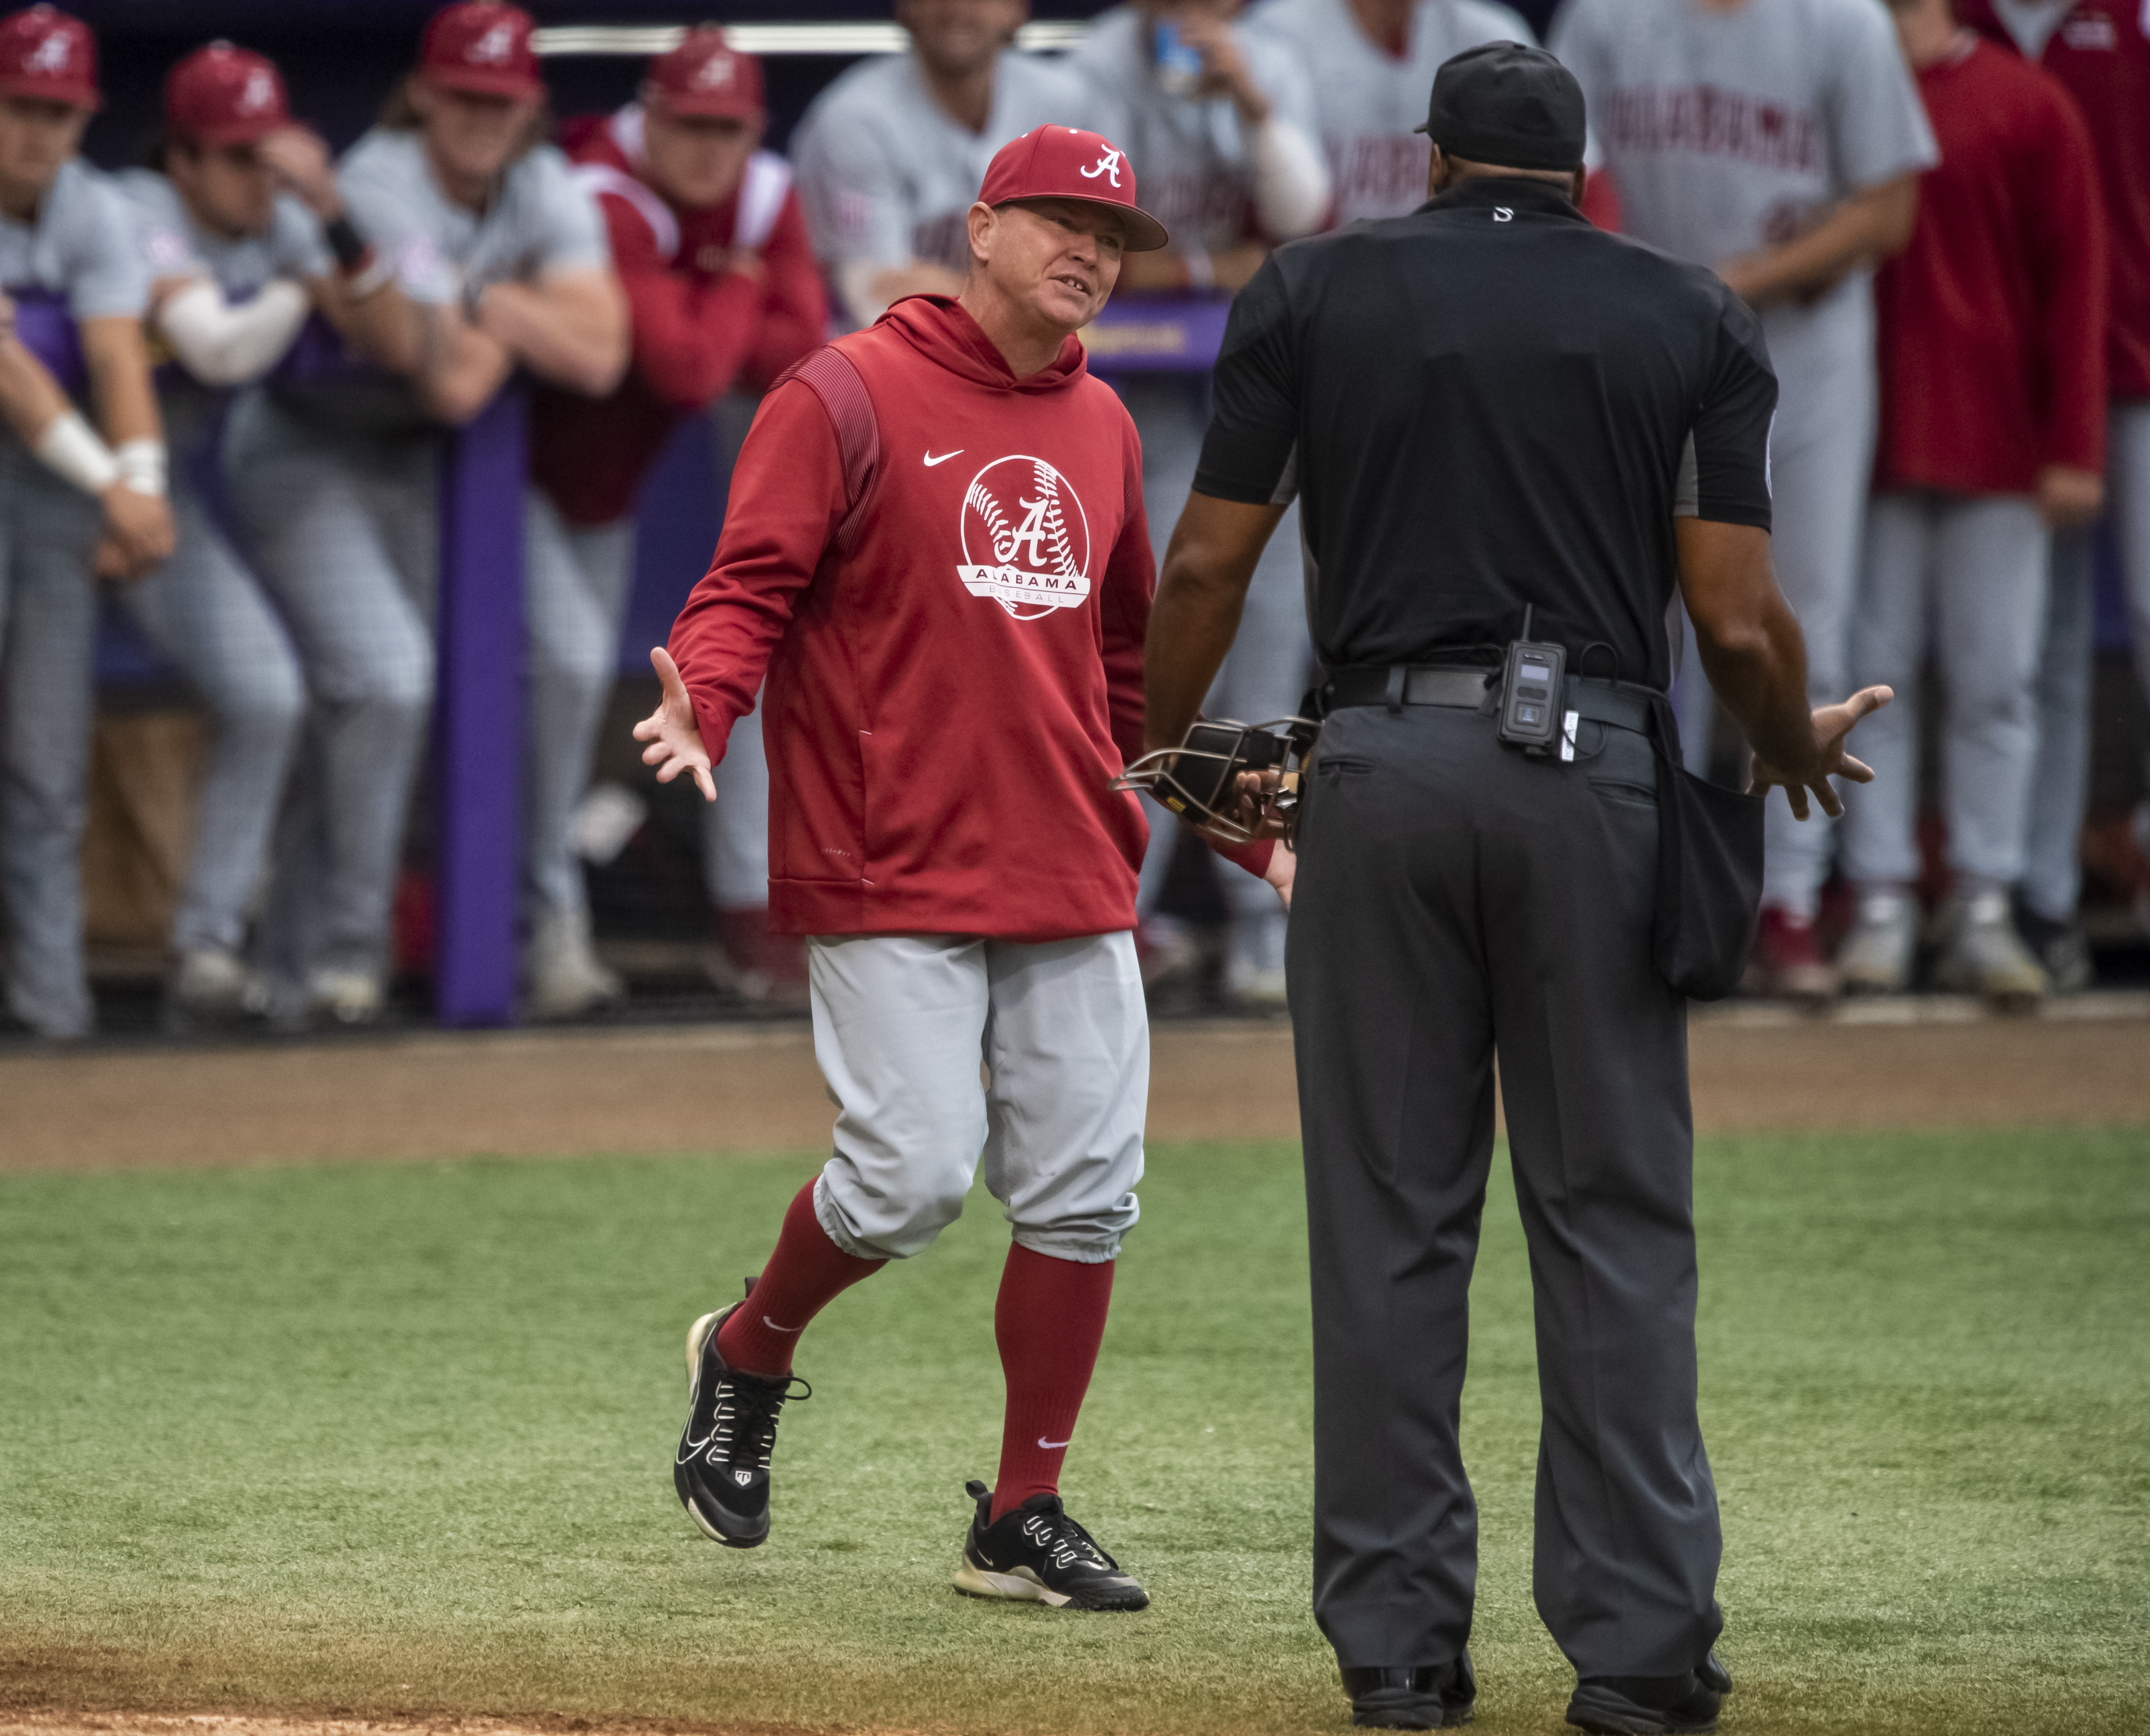 Alabama head coach Brad Bohannon, left, argues with umpire Joe Harris after being tossed from an NCAA college baseball game in the bottom of the second inning against LSU, Saturday, April 29, 2023, in Baton Rouge, Louisiana./The Advocate via AP)